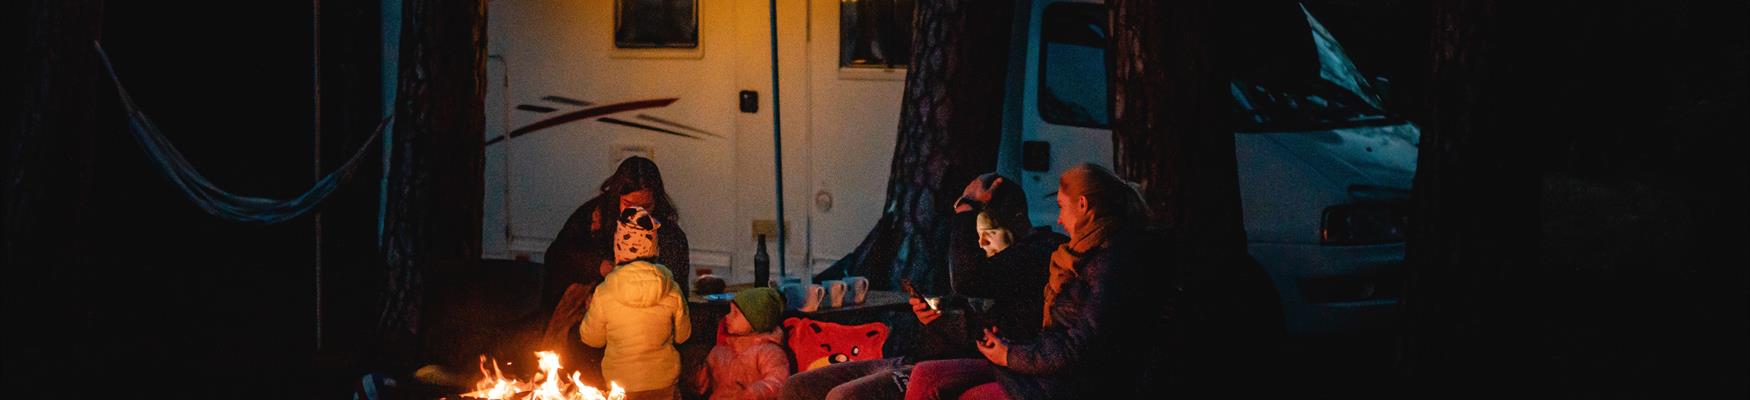 A family at night outside their camper van